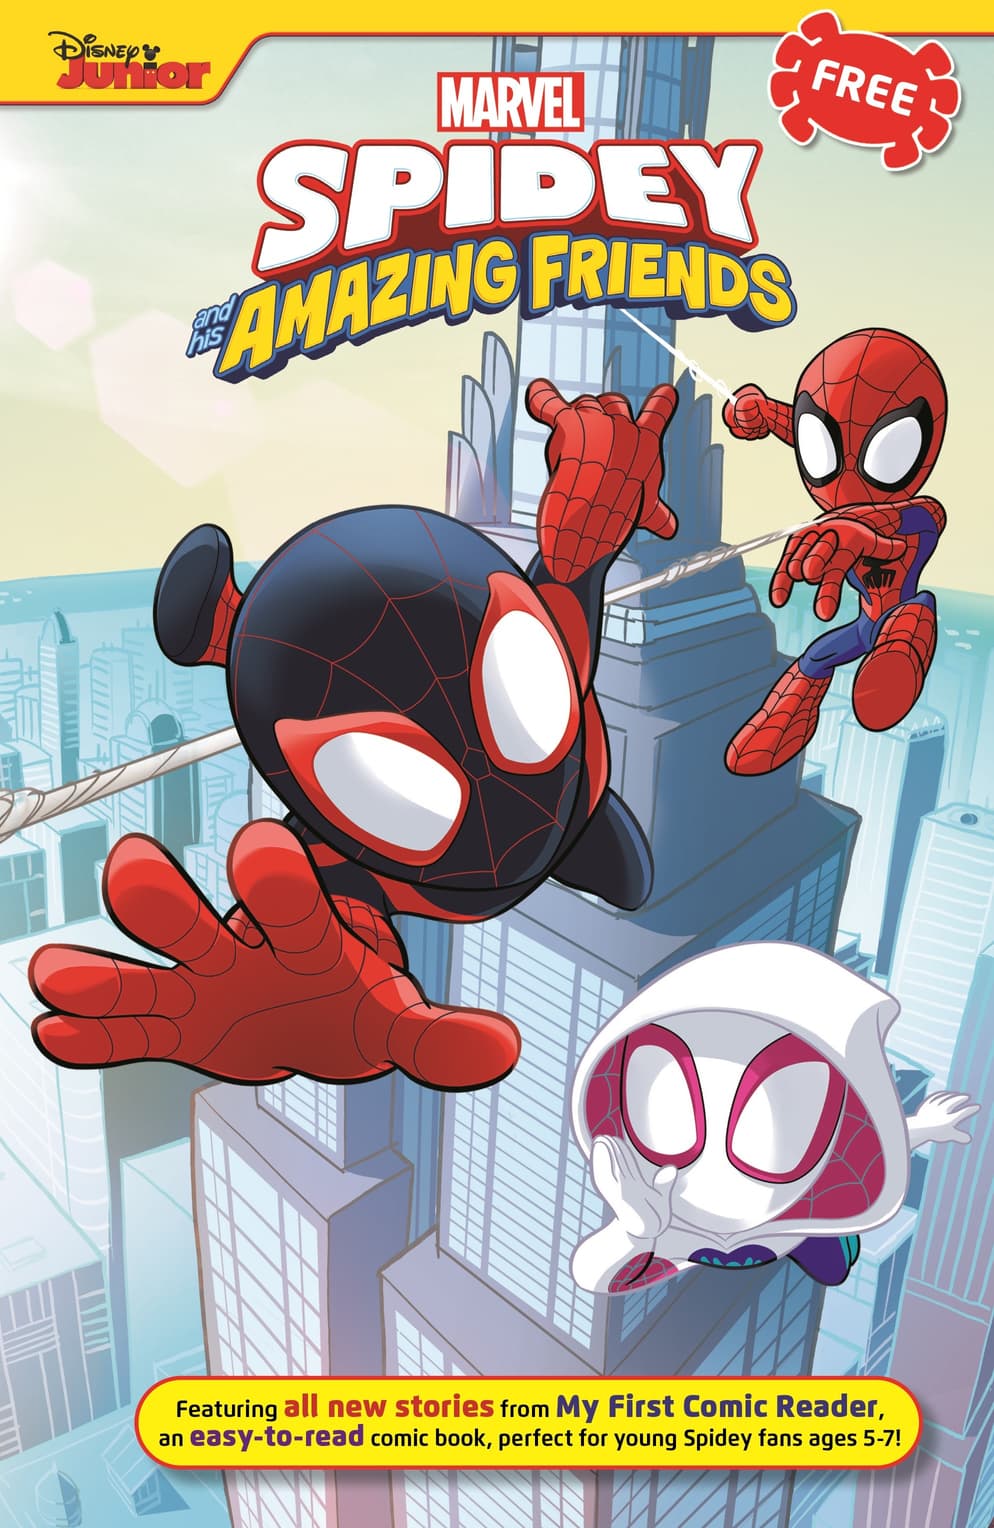 Cover to SPIDEY AND HIS AMAZING FRIENDS FREE COMIC by Falcinelli & Co.! 